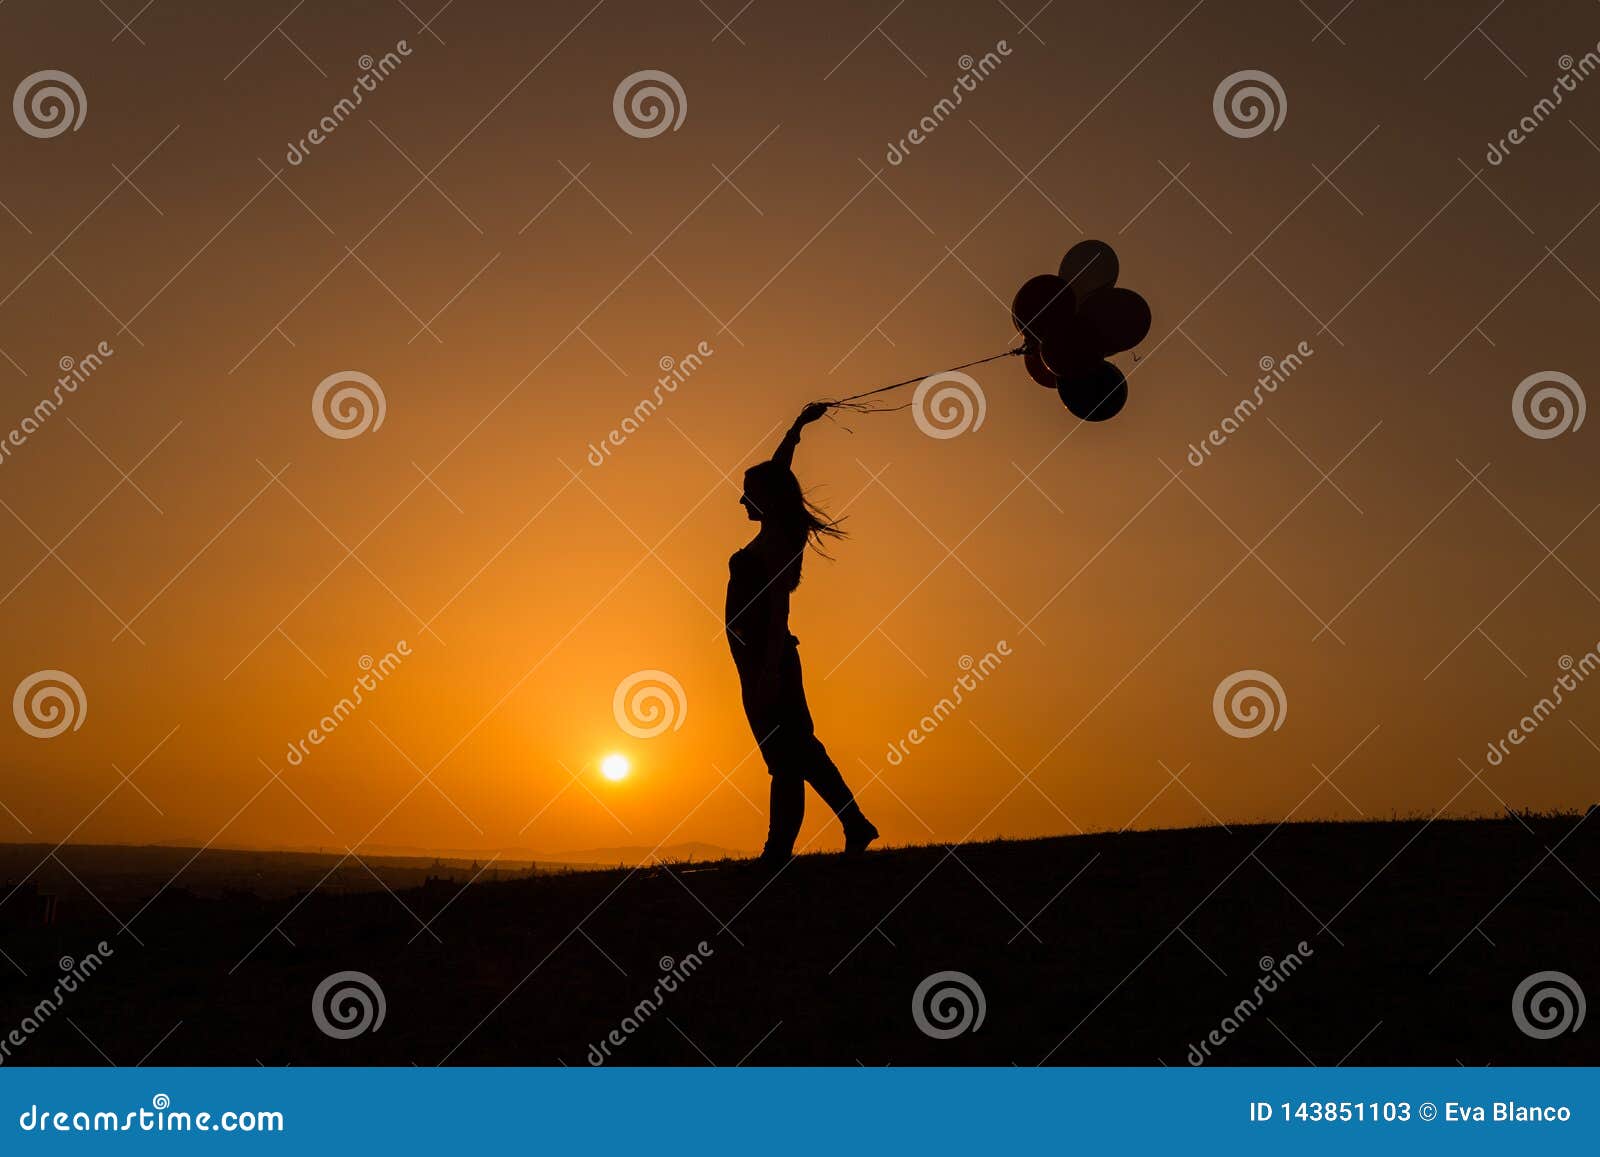 silhouette of a young woman playing with balloons at sunset